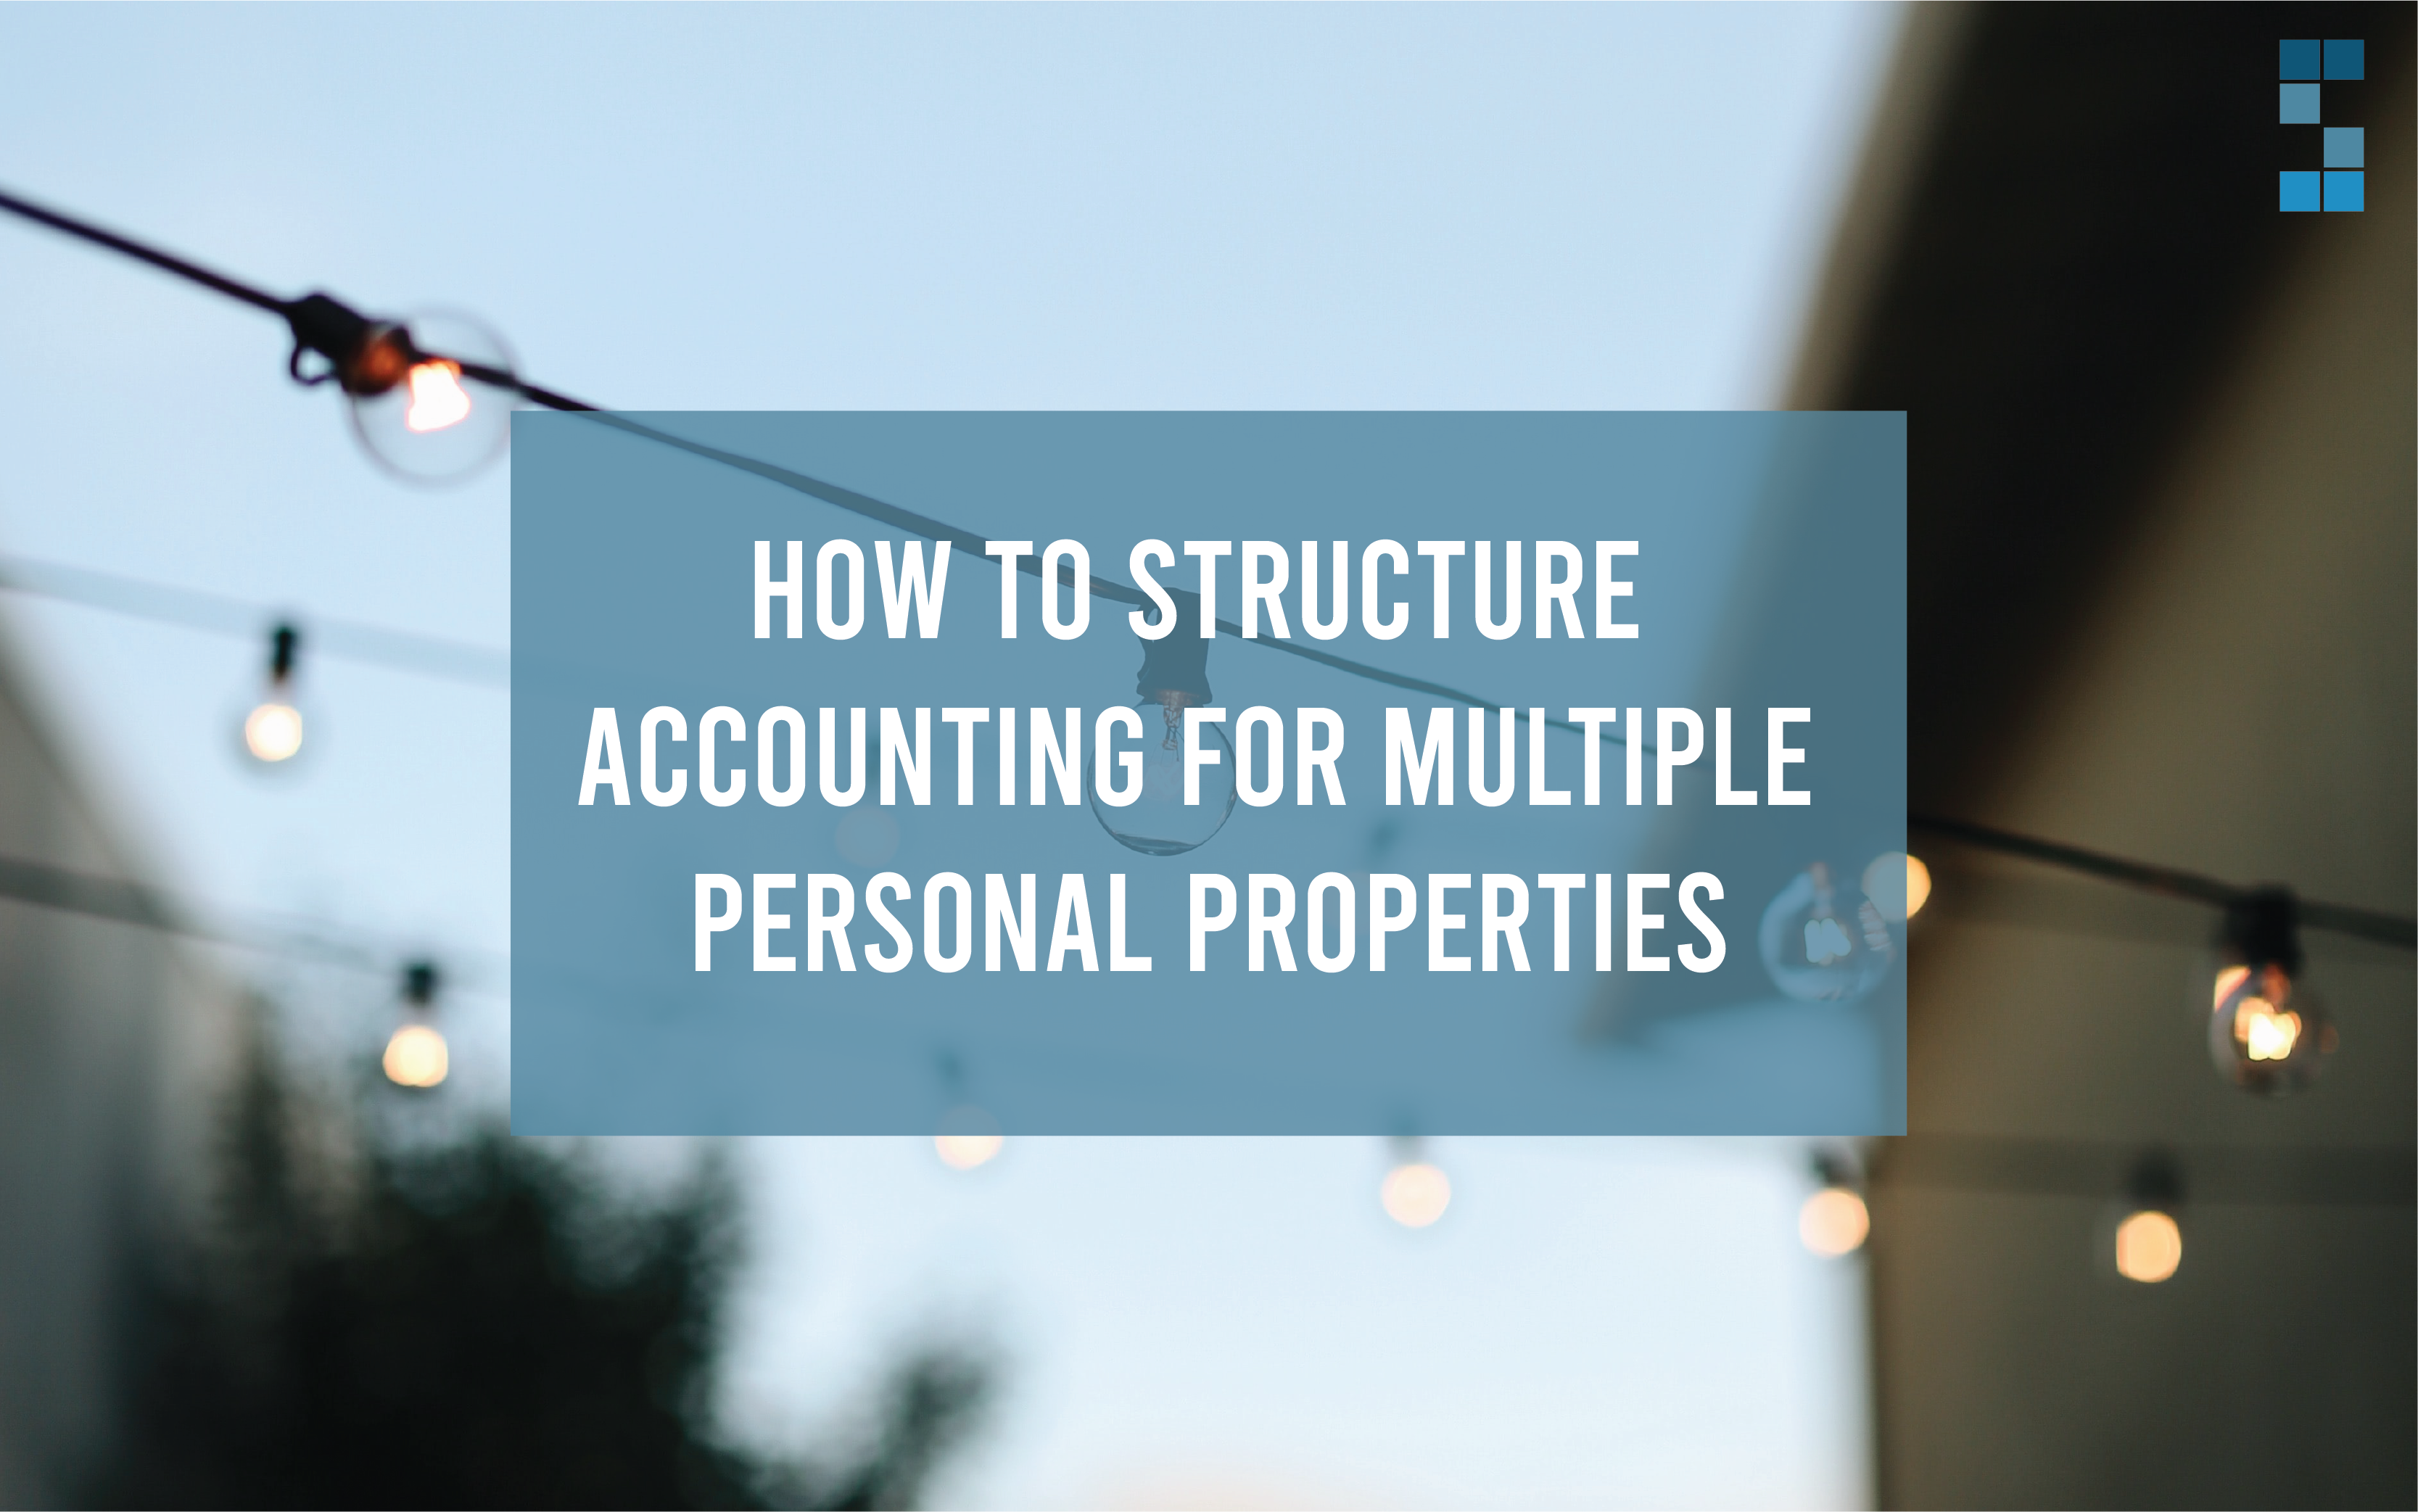 How to Structure Accounting for Multiple Personal Properties